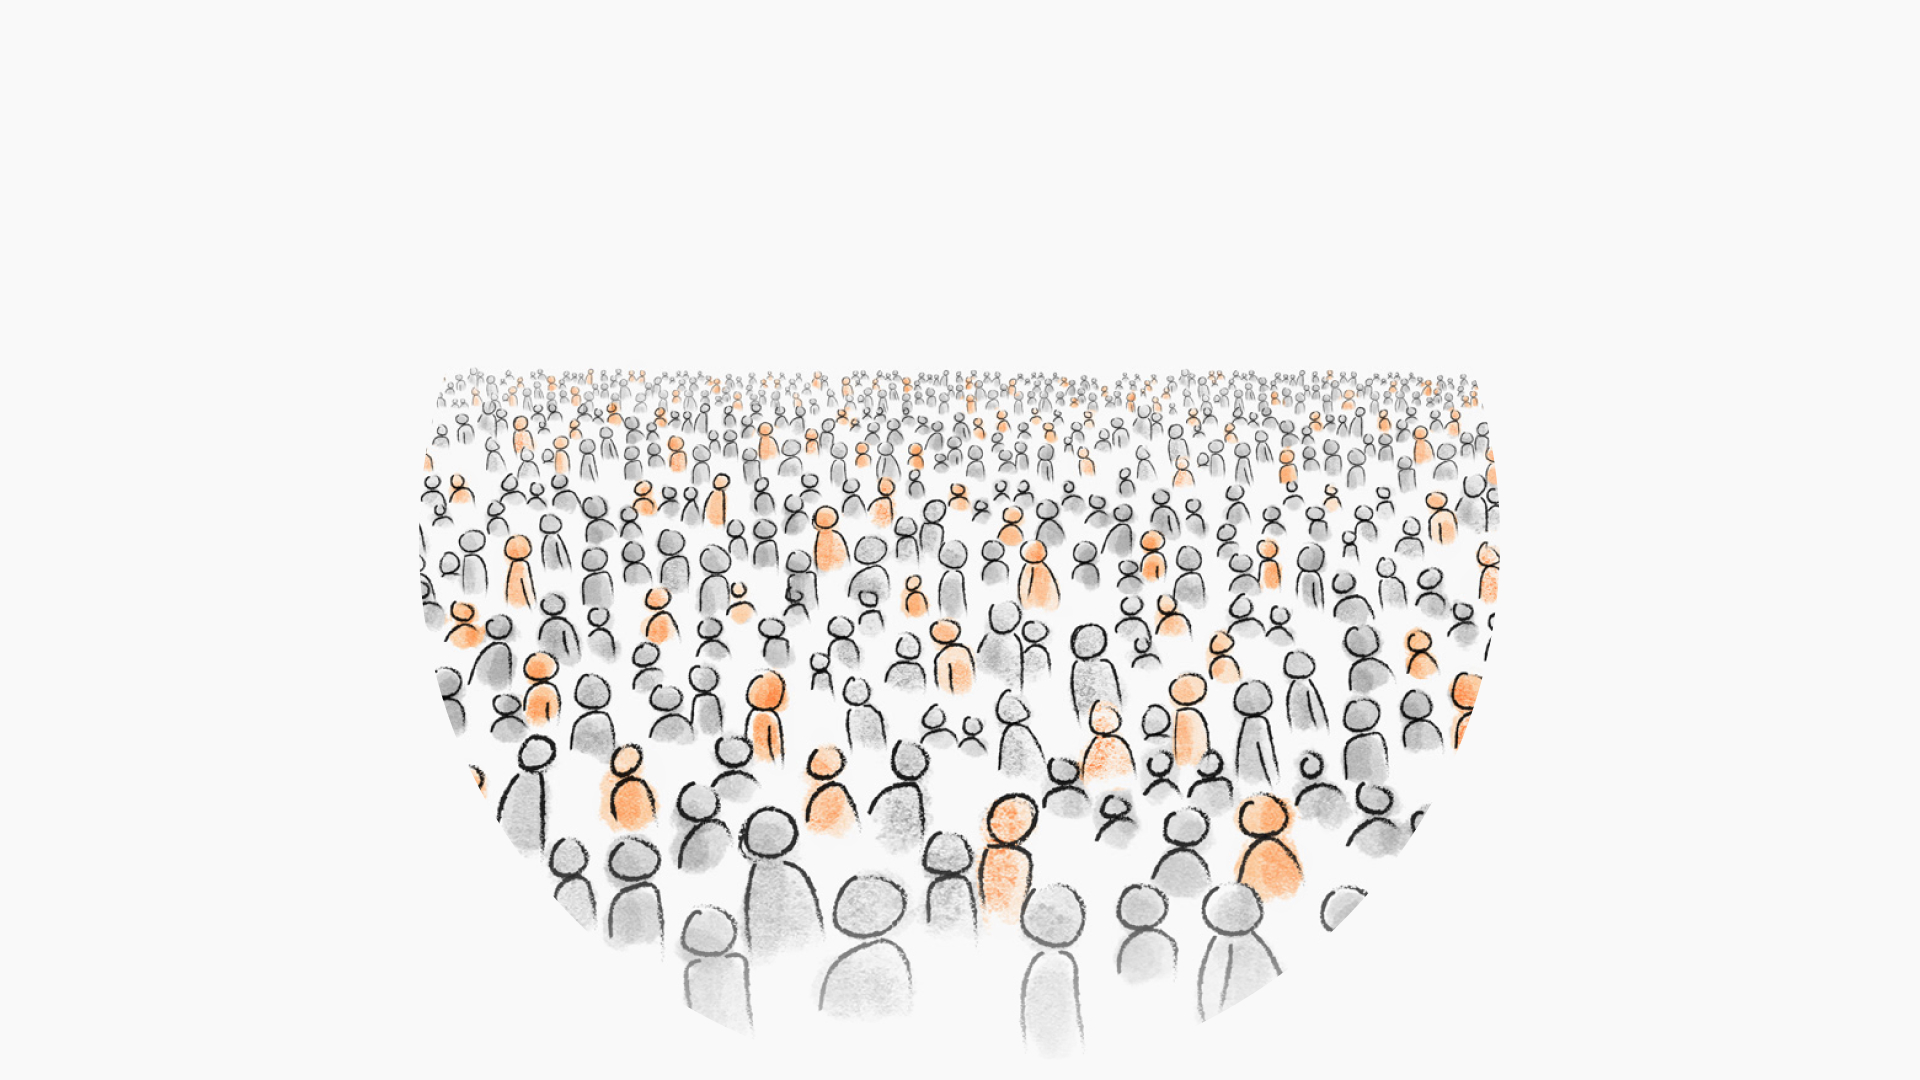 Illustration of highlighted figures amongst a crowd